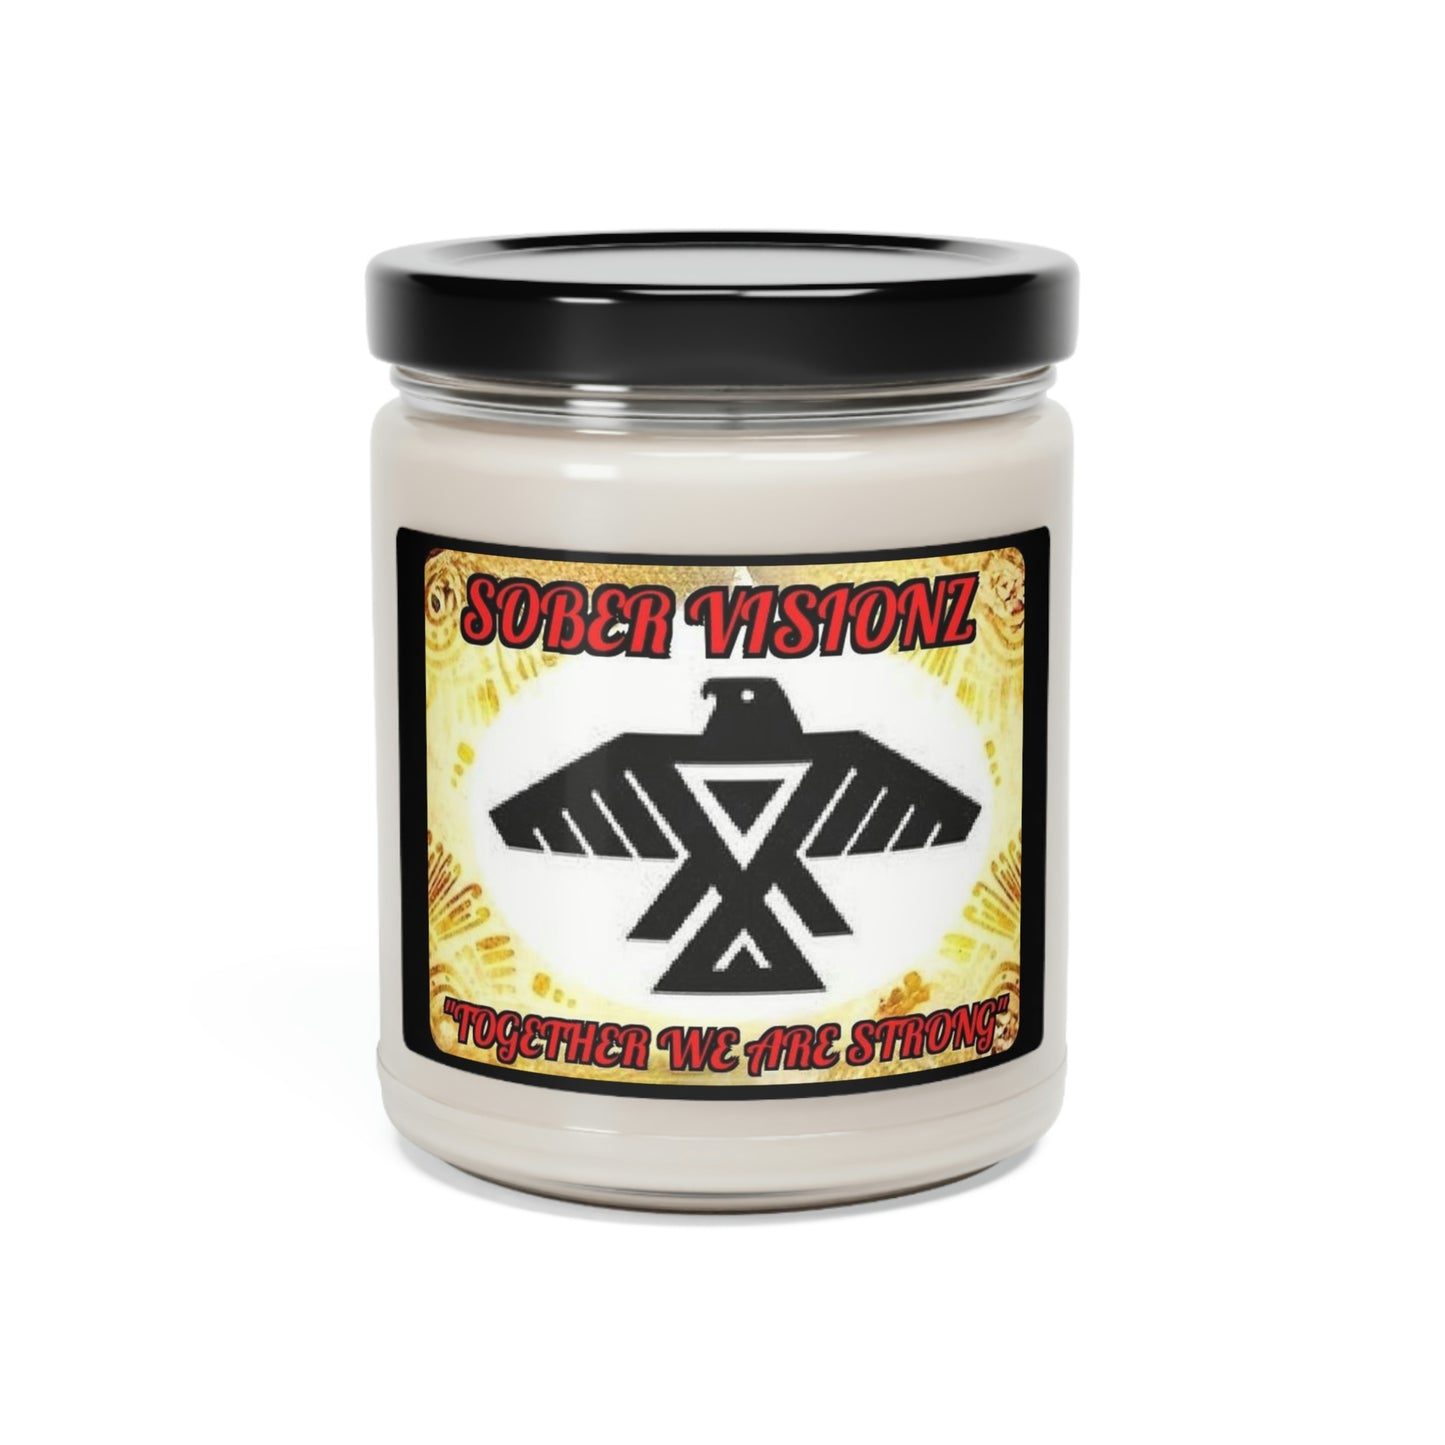 Scented Sober Visionz Candle, 9oz